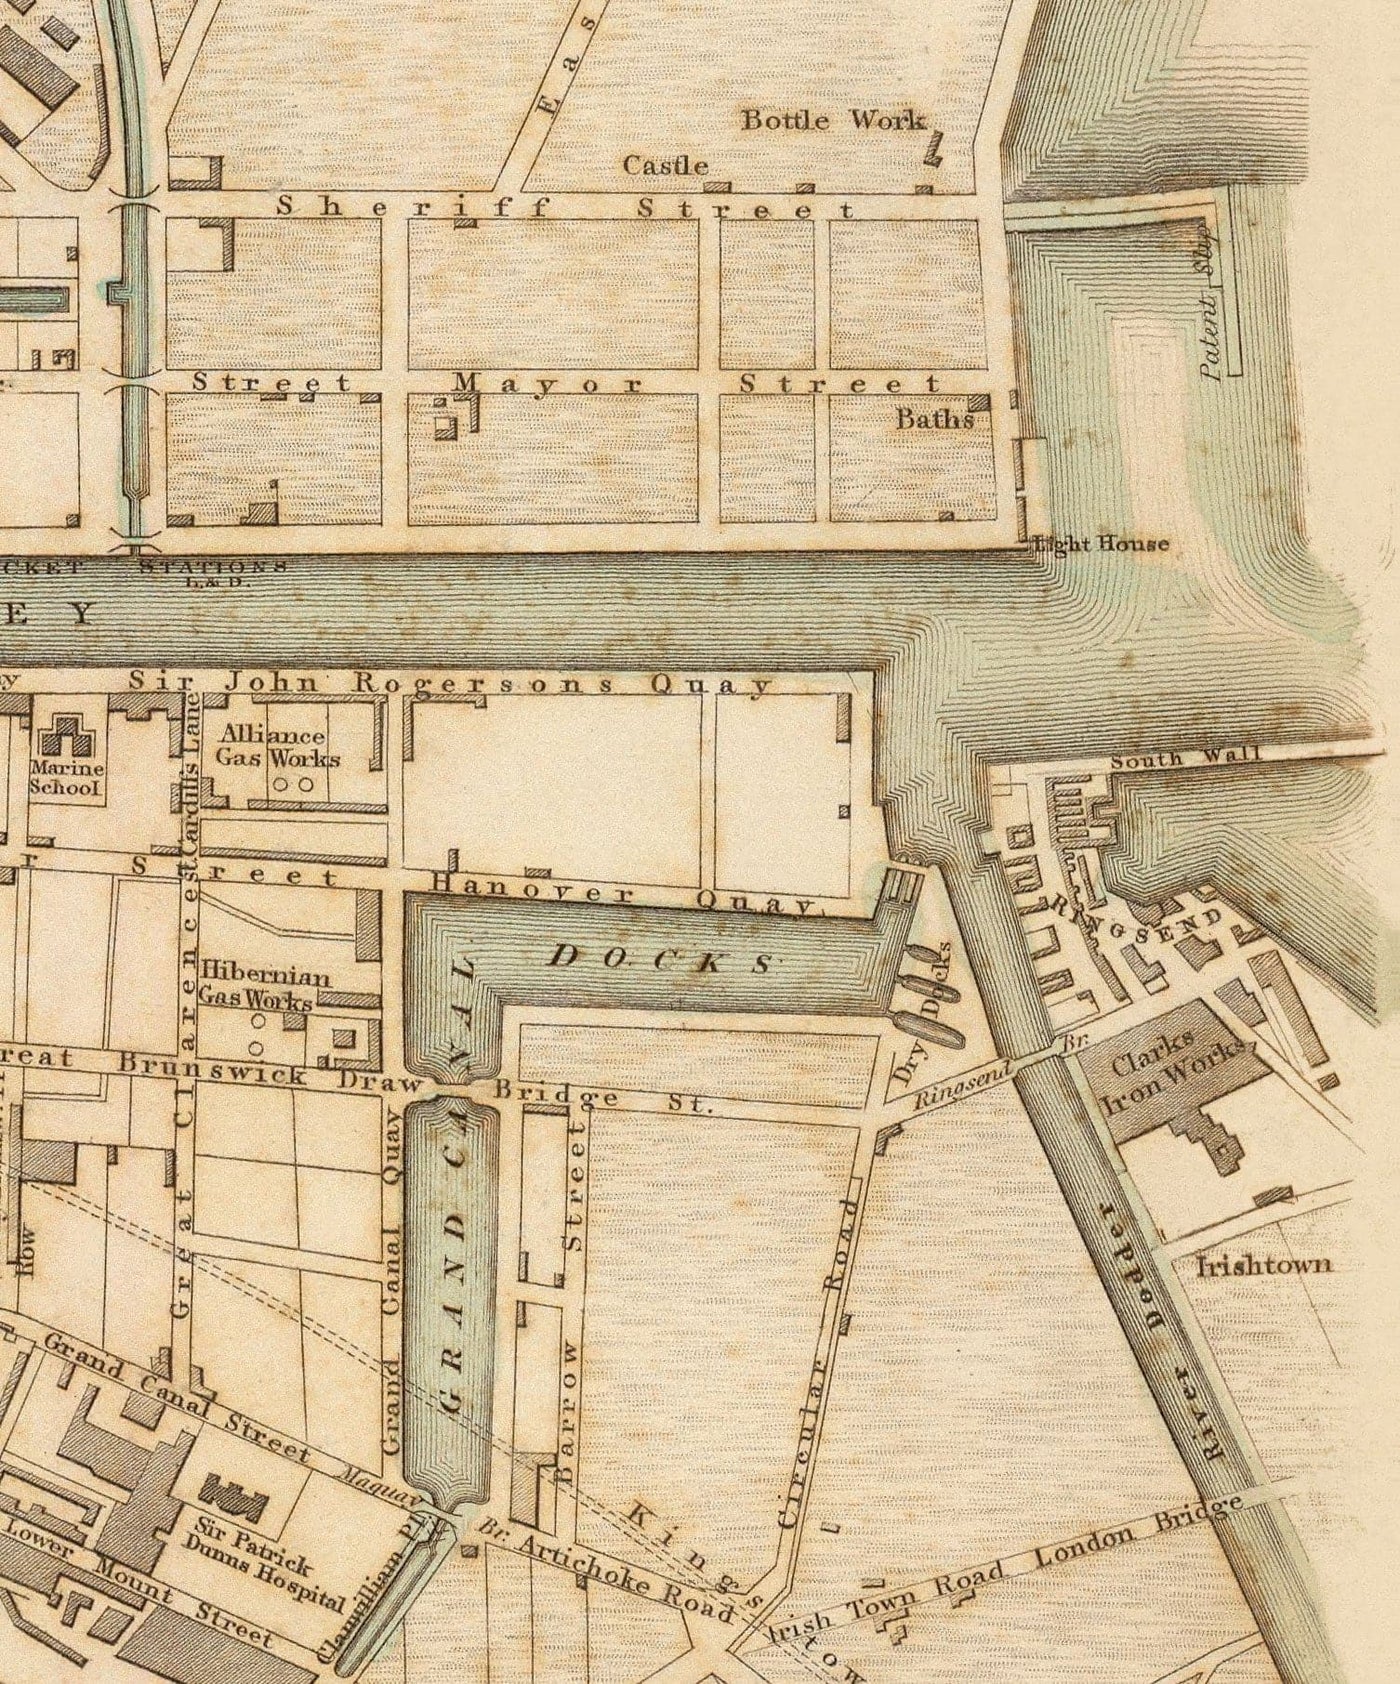 Old Map of Dublin, Ireland in 1836 by WB Clark - River Liffey, Leinster, County Dublin